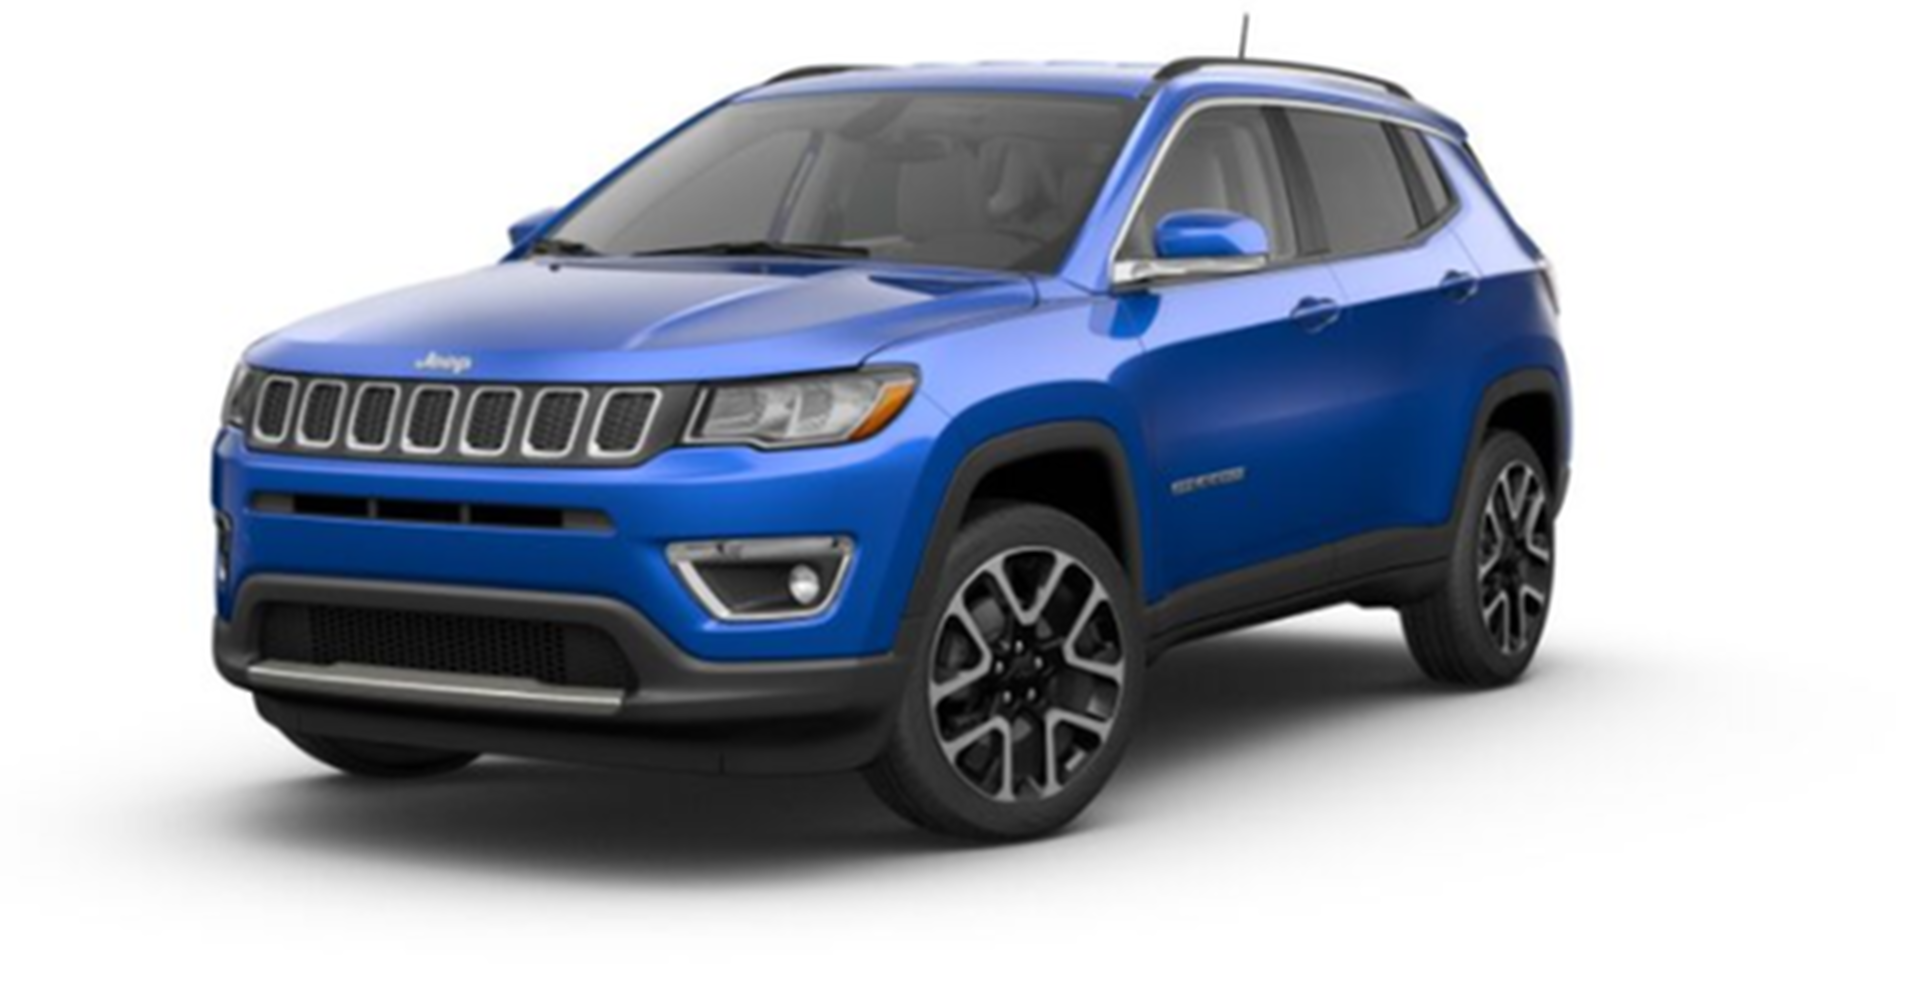 Jeep Compass gets 5 star safety rating